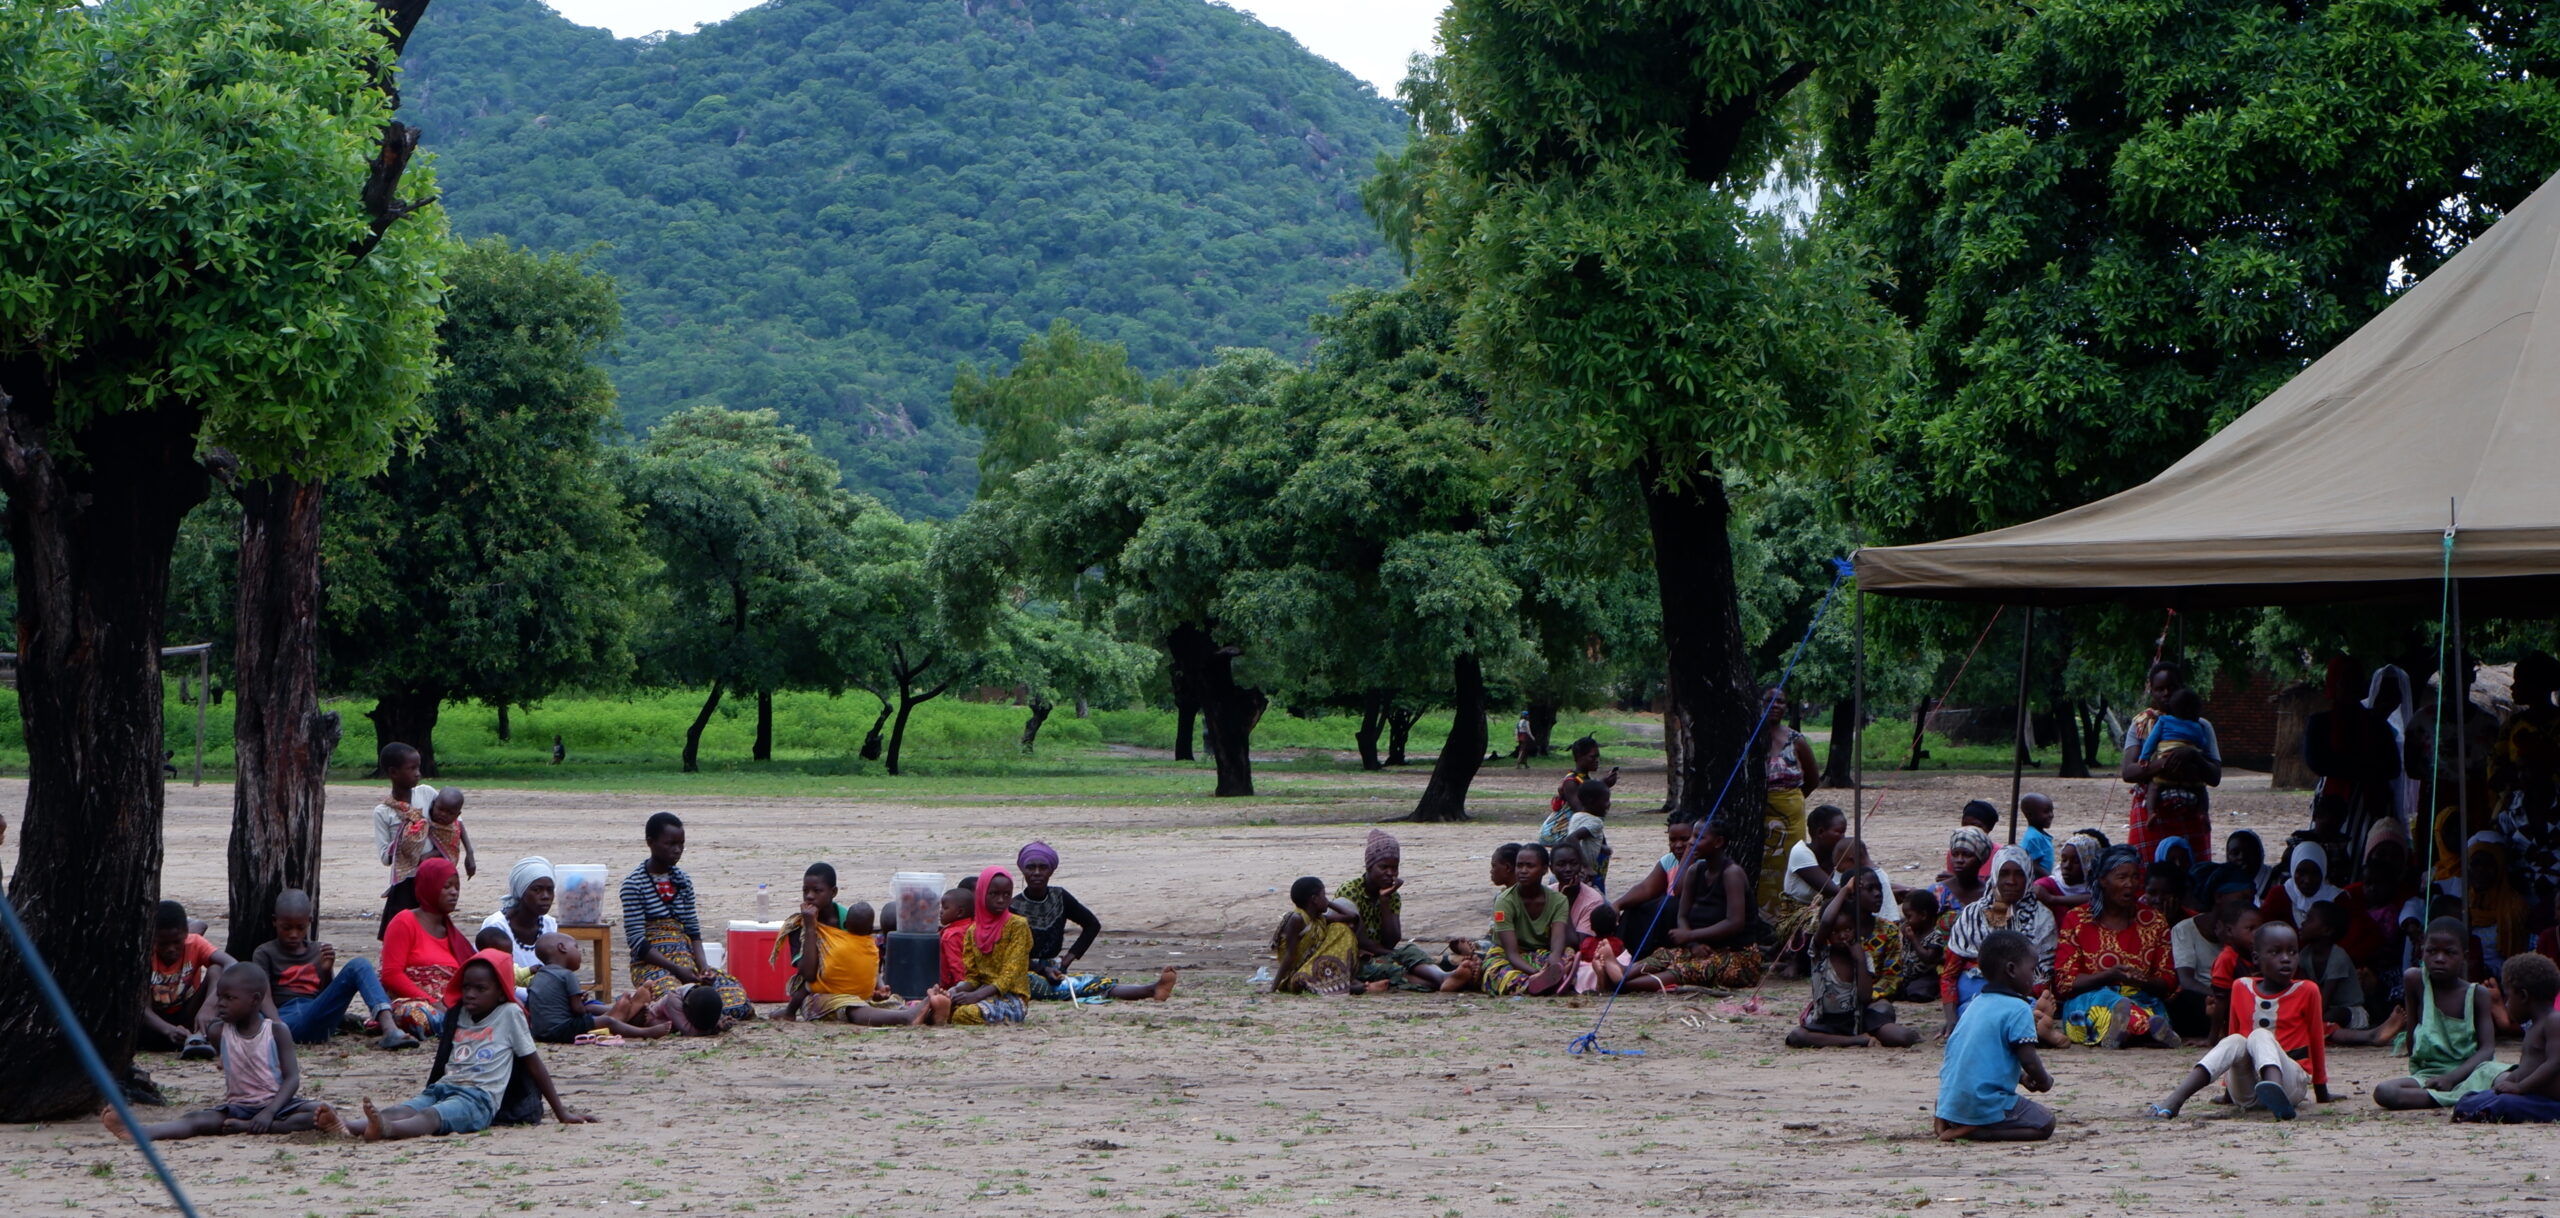 Malawi Trialogue participants sitting outdoors, with nature on the background